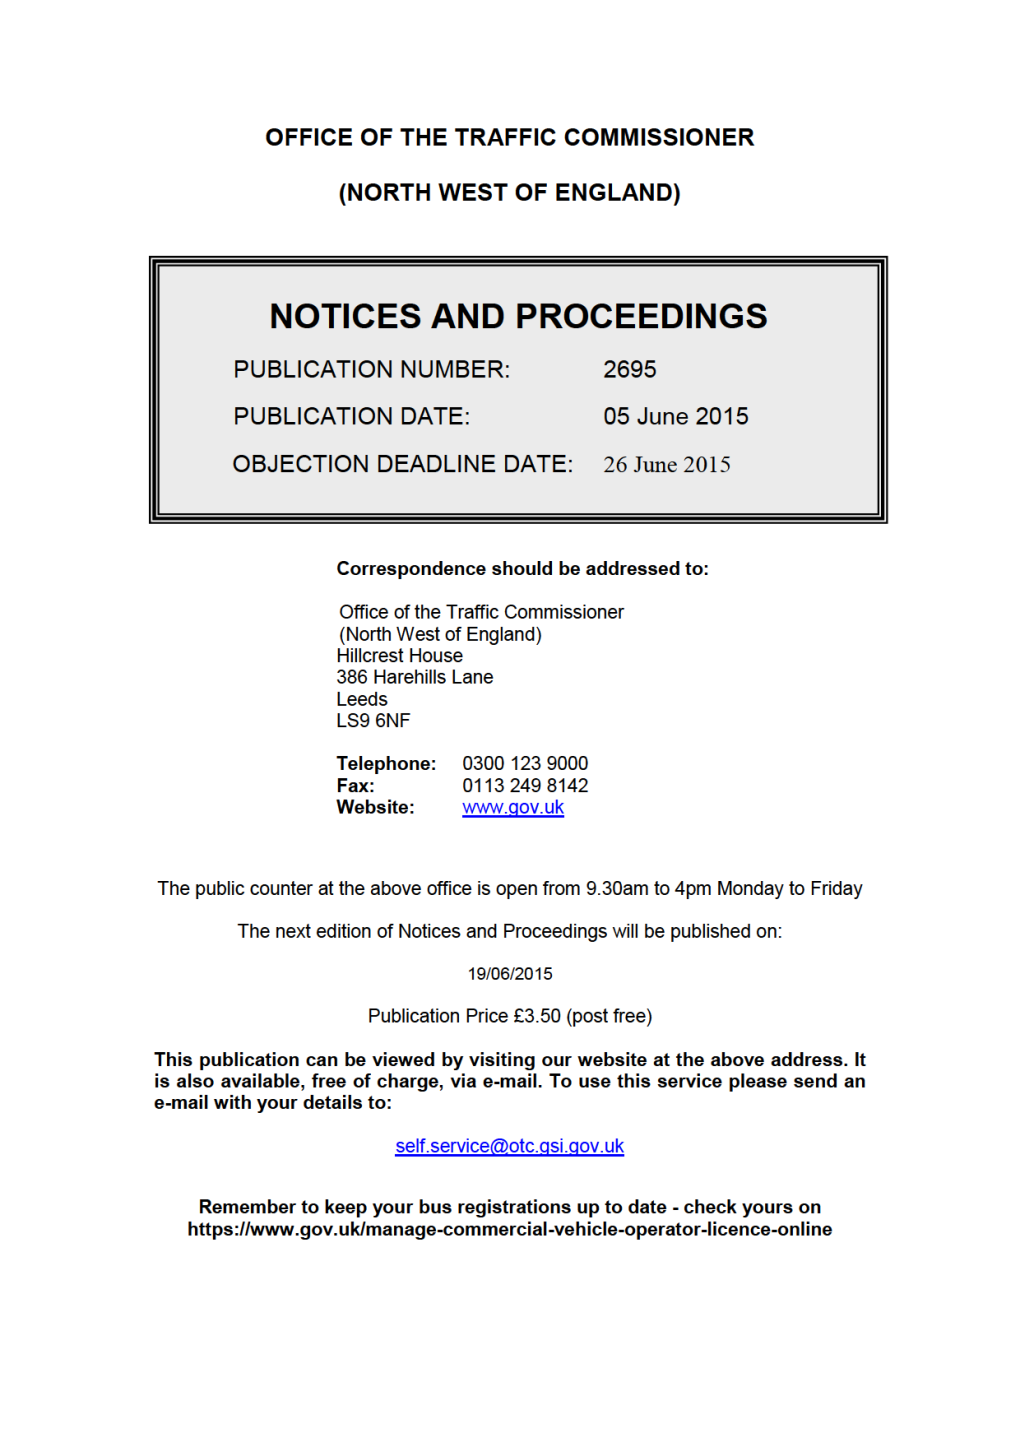 NOTICES and PROCEEDINGS 5 June 2015